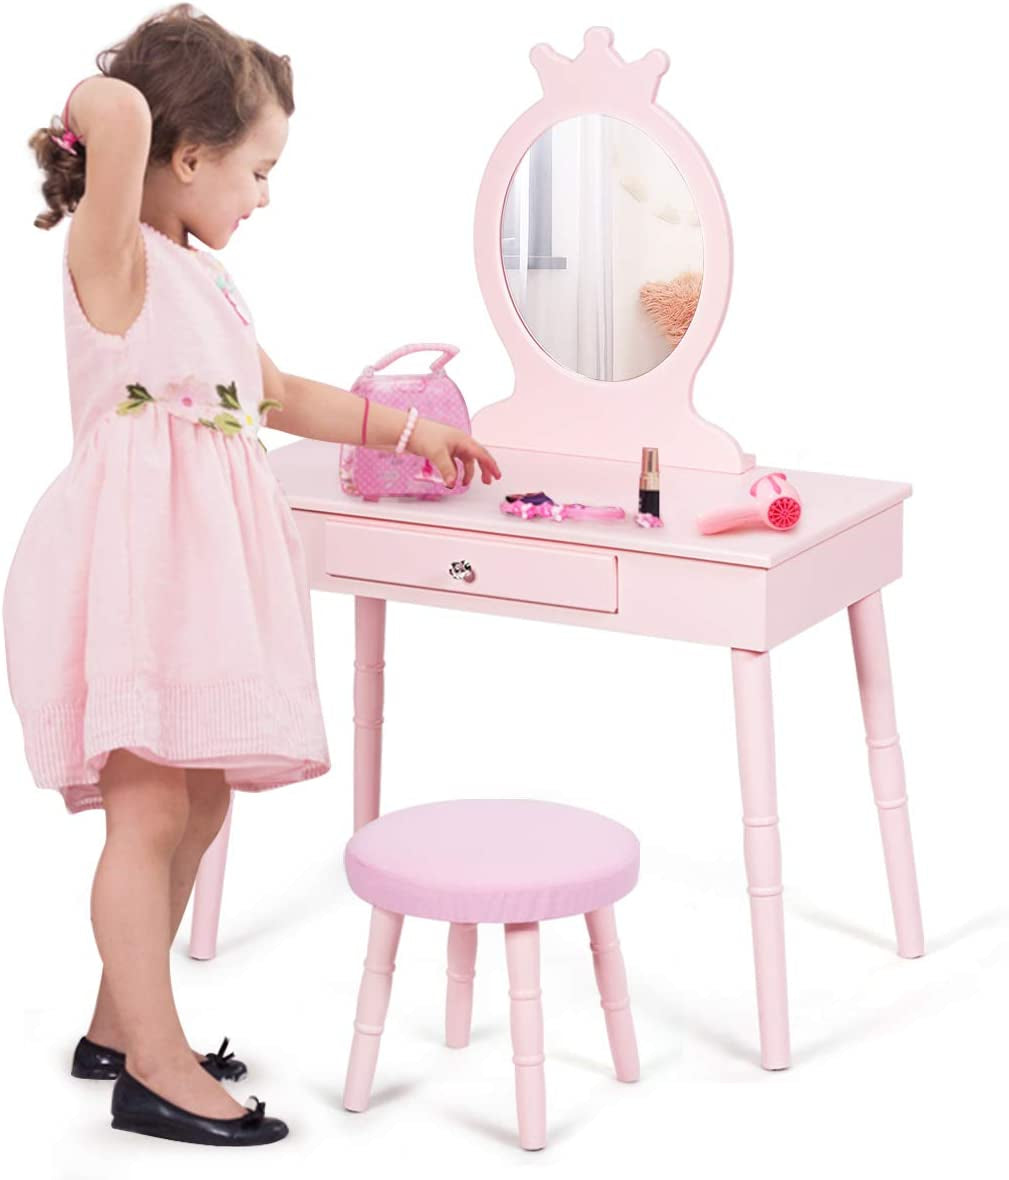 Kids Vanity, Crown Shape Princess Makeup Dressing Table and Chair Set W/Drawer, Cushioned Toddler Vanity Stool, Real Glass Mirror, Wooden Little Girls Vanity Set with Mirror and Stool, Pink